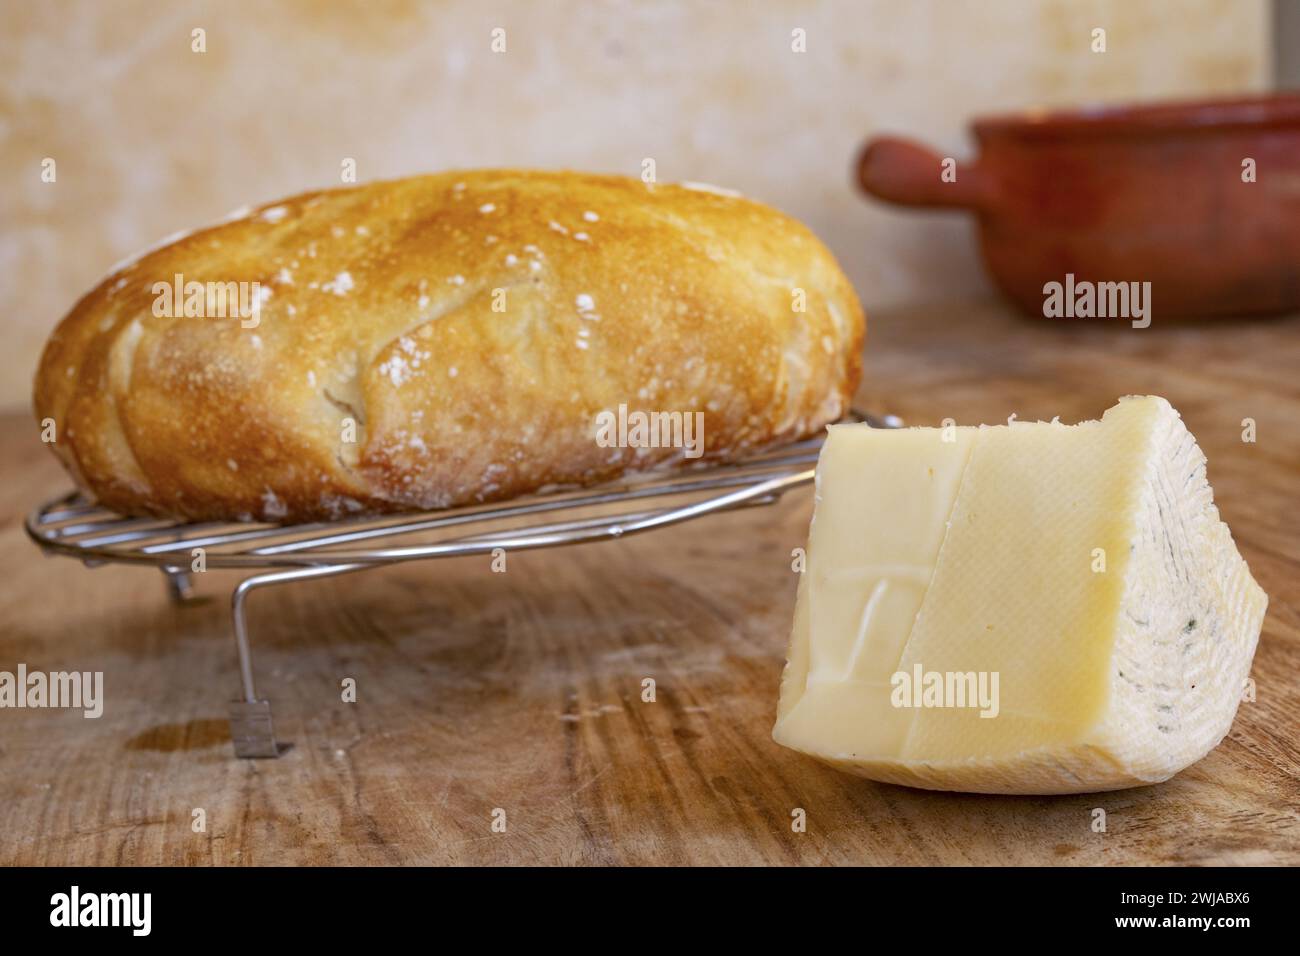 wedge of artisanal caciotta cheese near a loaf of homemade bread Stock Photo